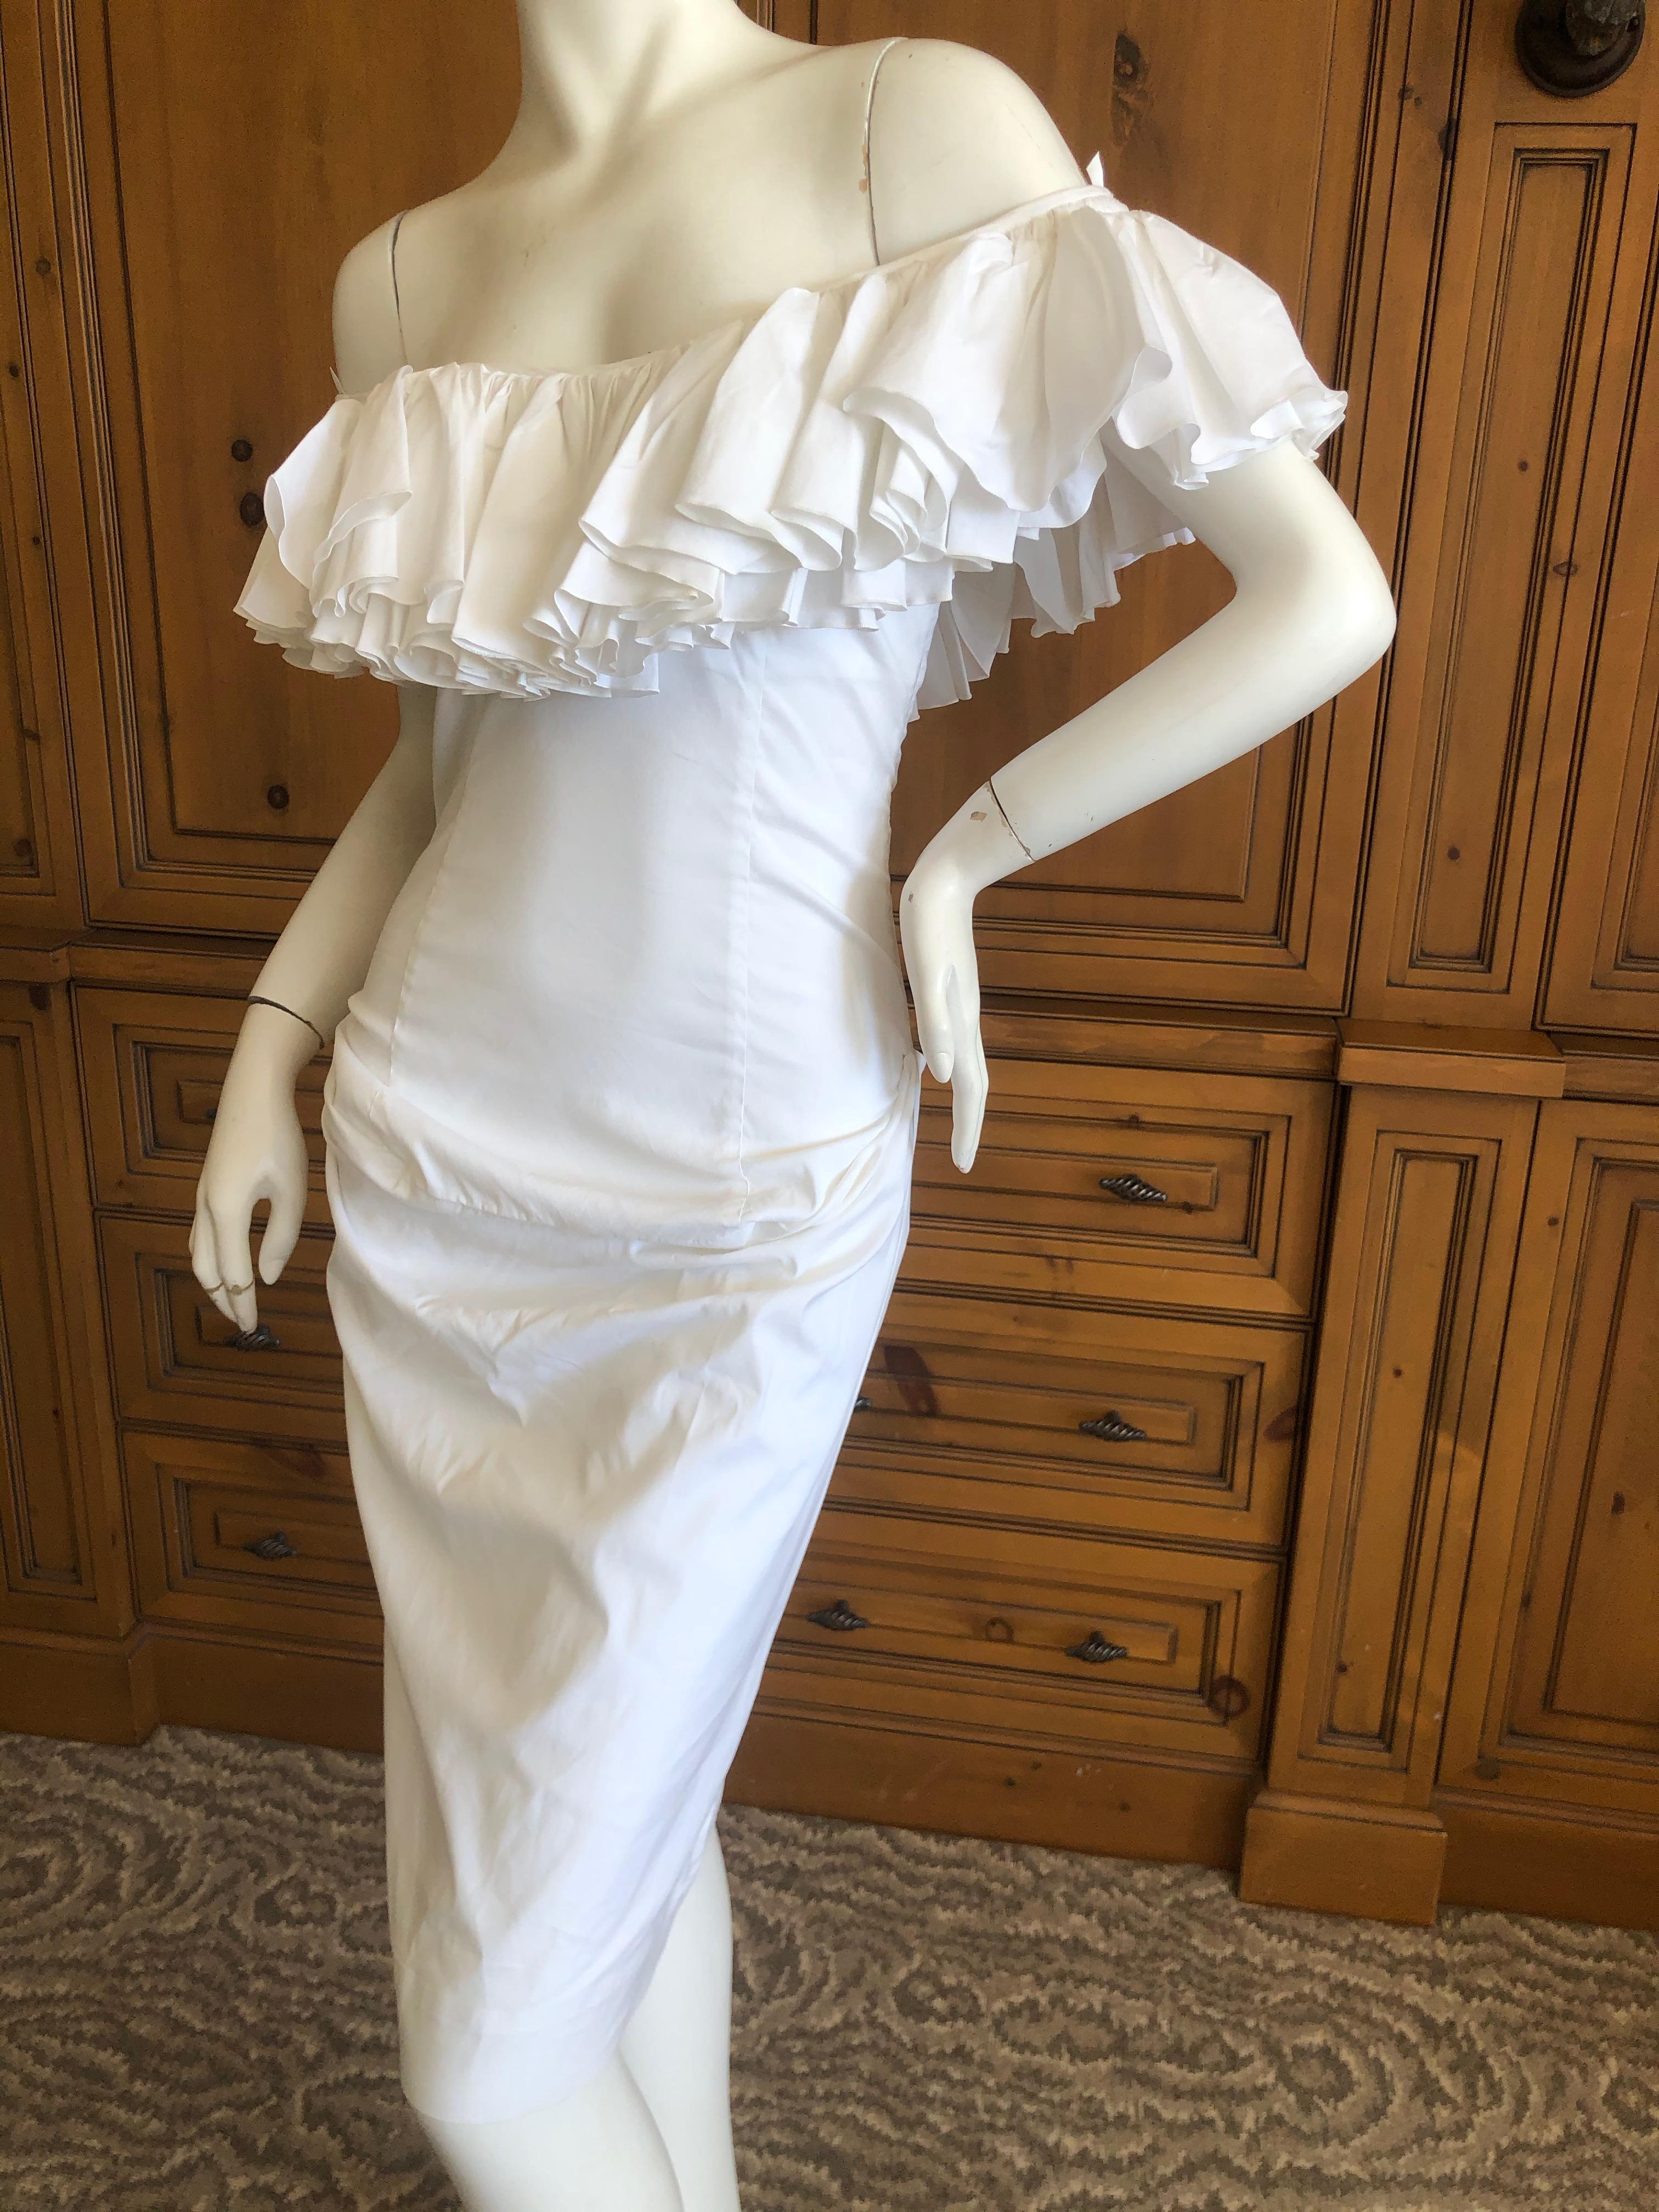 Vivienne Westwood Vintage White Cotton Ruffled Off the Shoulder Dress.
This is Red Label Vivienne Westwood.
 Size 40
 Bust 34